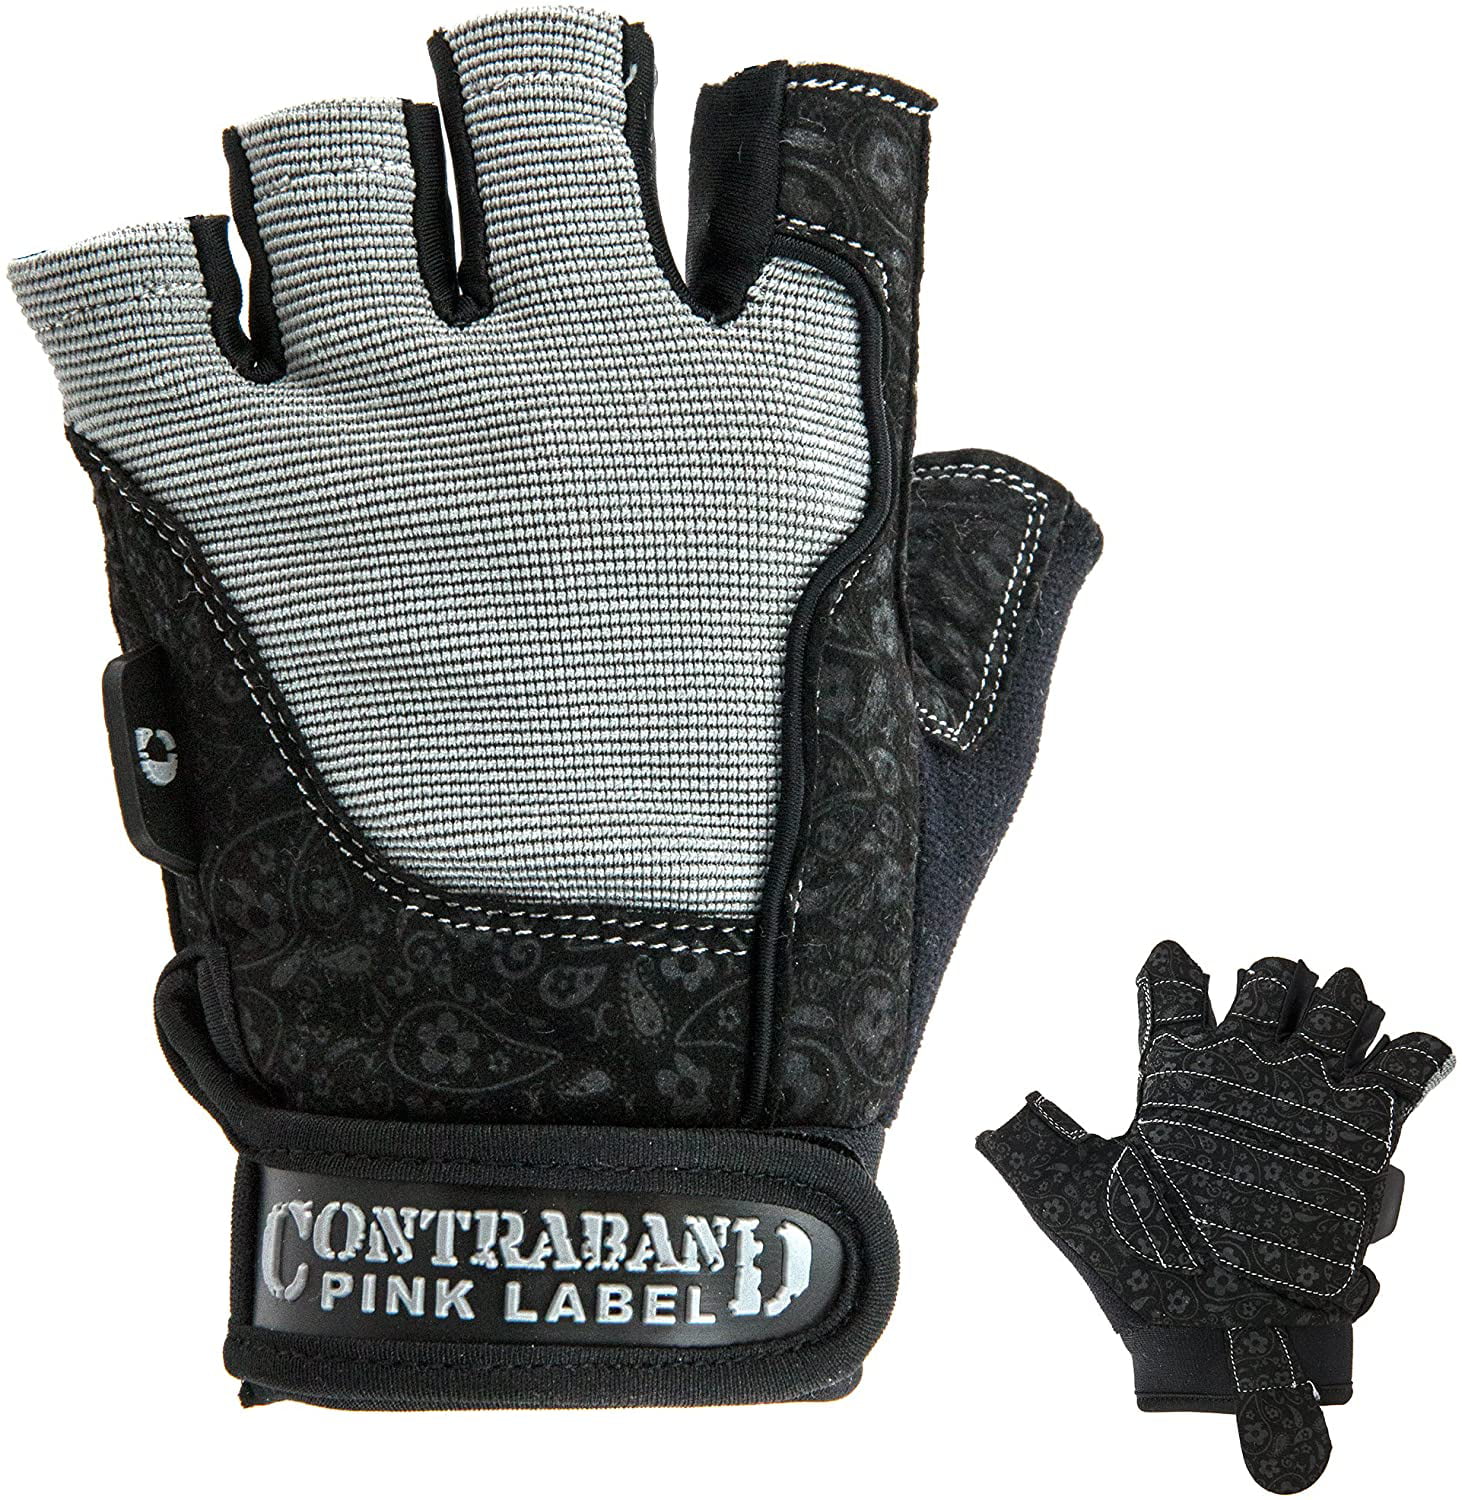 Contraband Pink Label 5127 Weight Lifting Gloves PAIR 